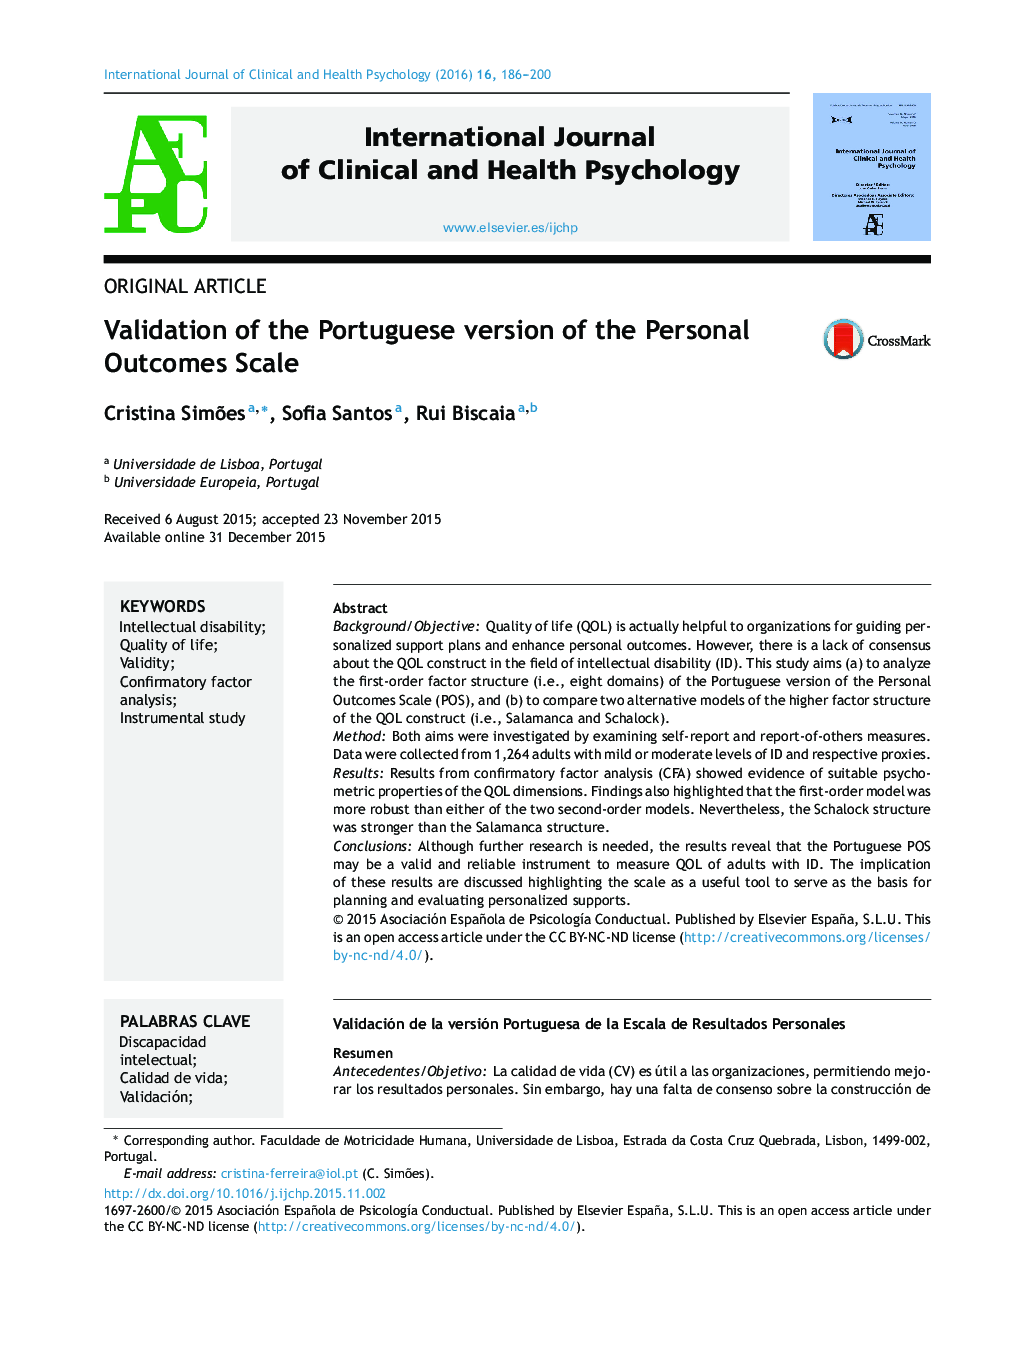 Validation of the Portuguese version of the Personal Outcomes Scale